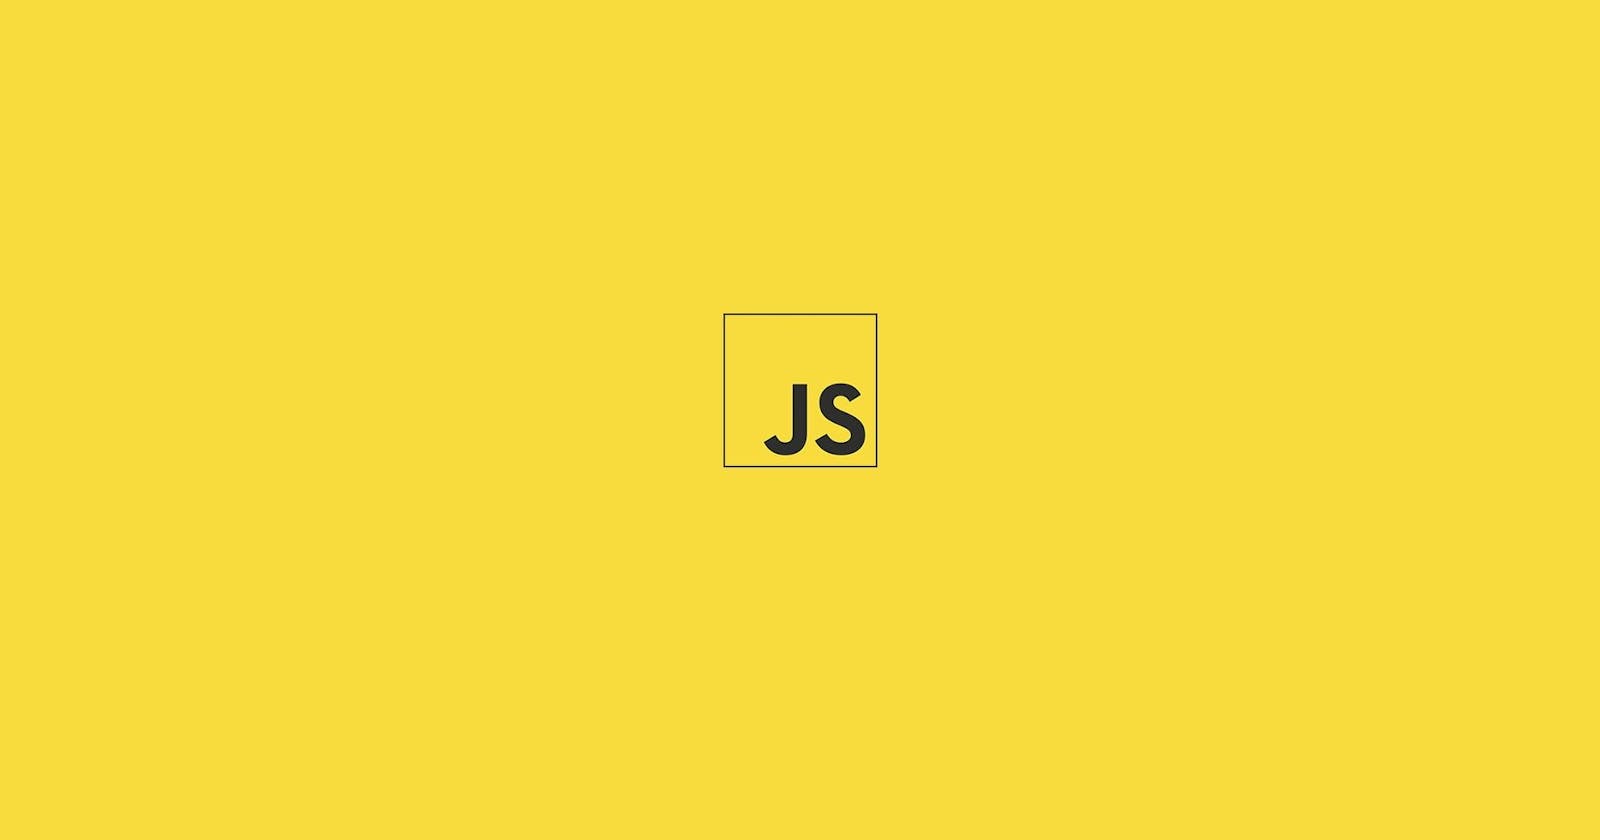 Useful websites that I have bookmarked (& you should too) to Learn & Practice JavaScript